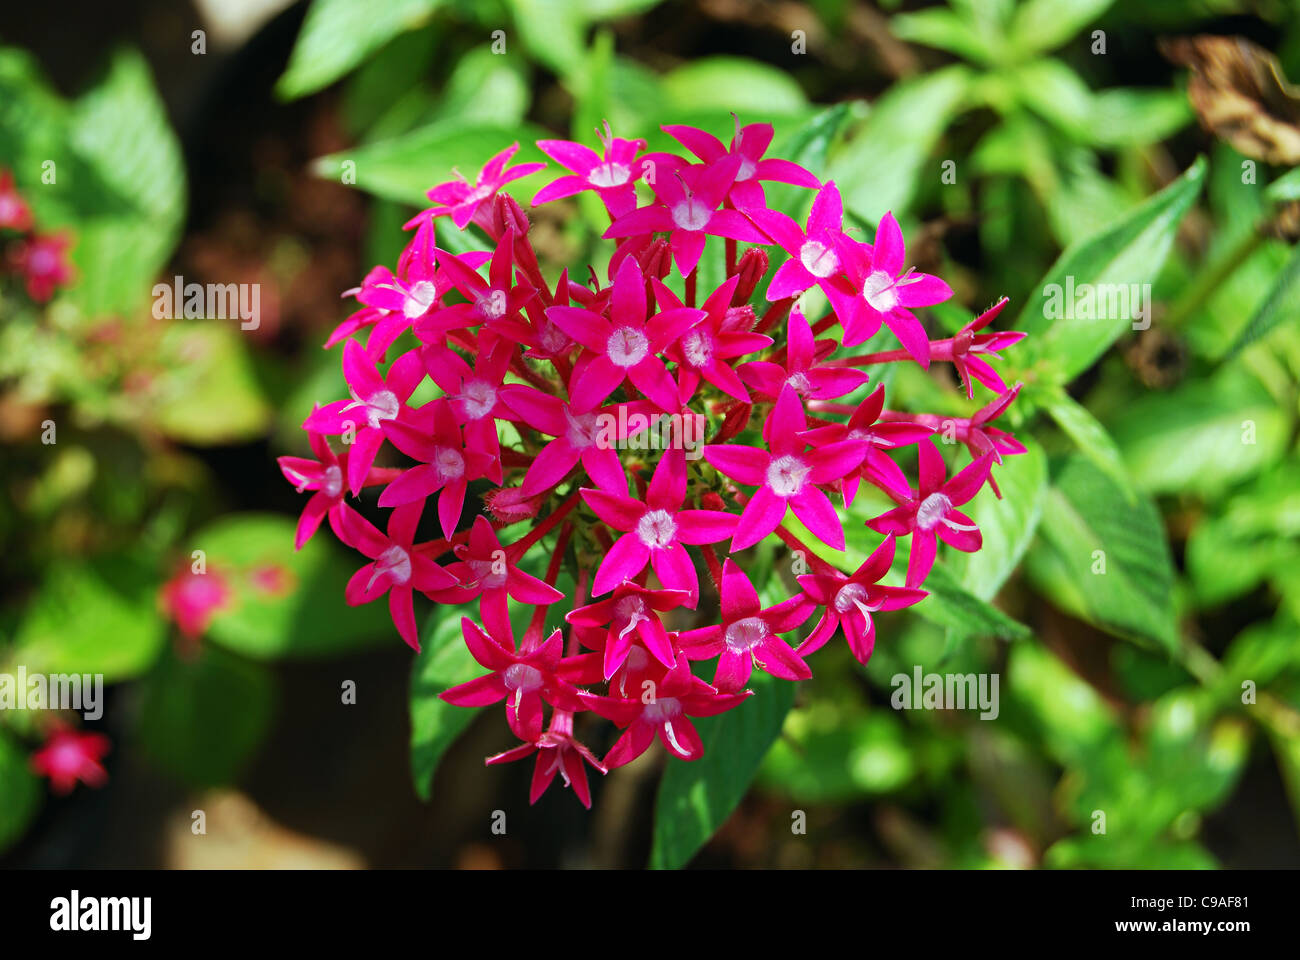 Pink penta flowers. Pentas lanceolata also called Egyptian stars for the bloom’s five-pointed shape. Best flowers to attract butterflies Stock Photo